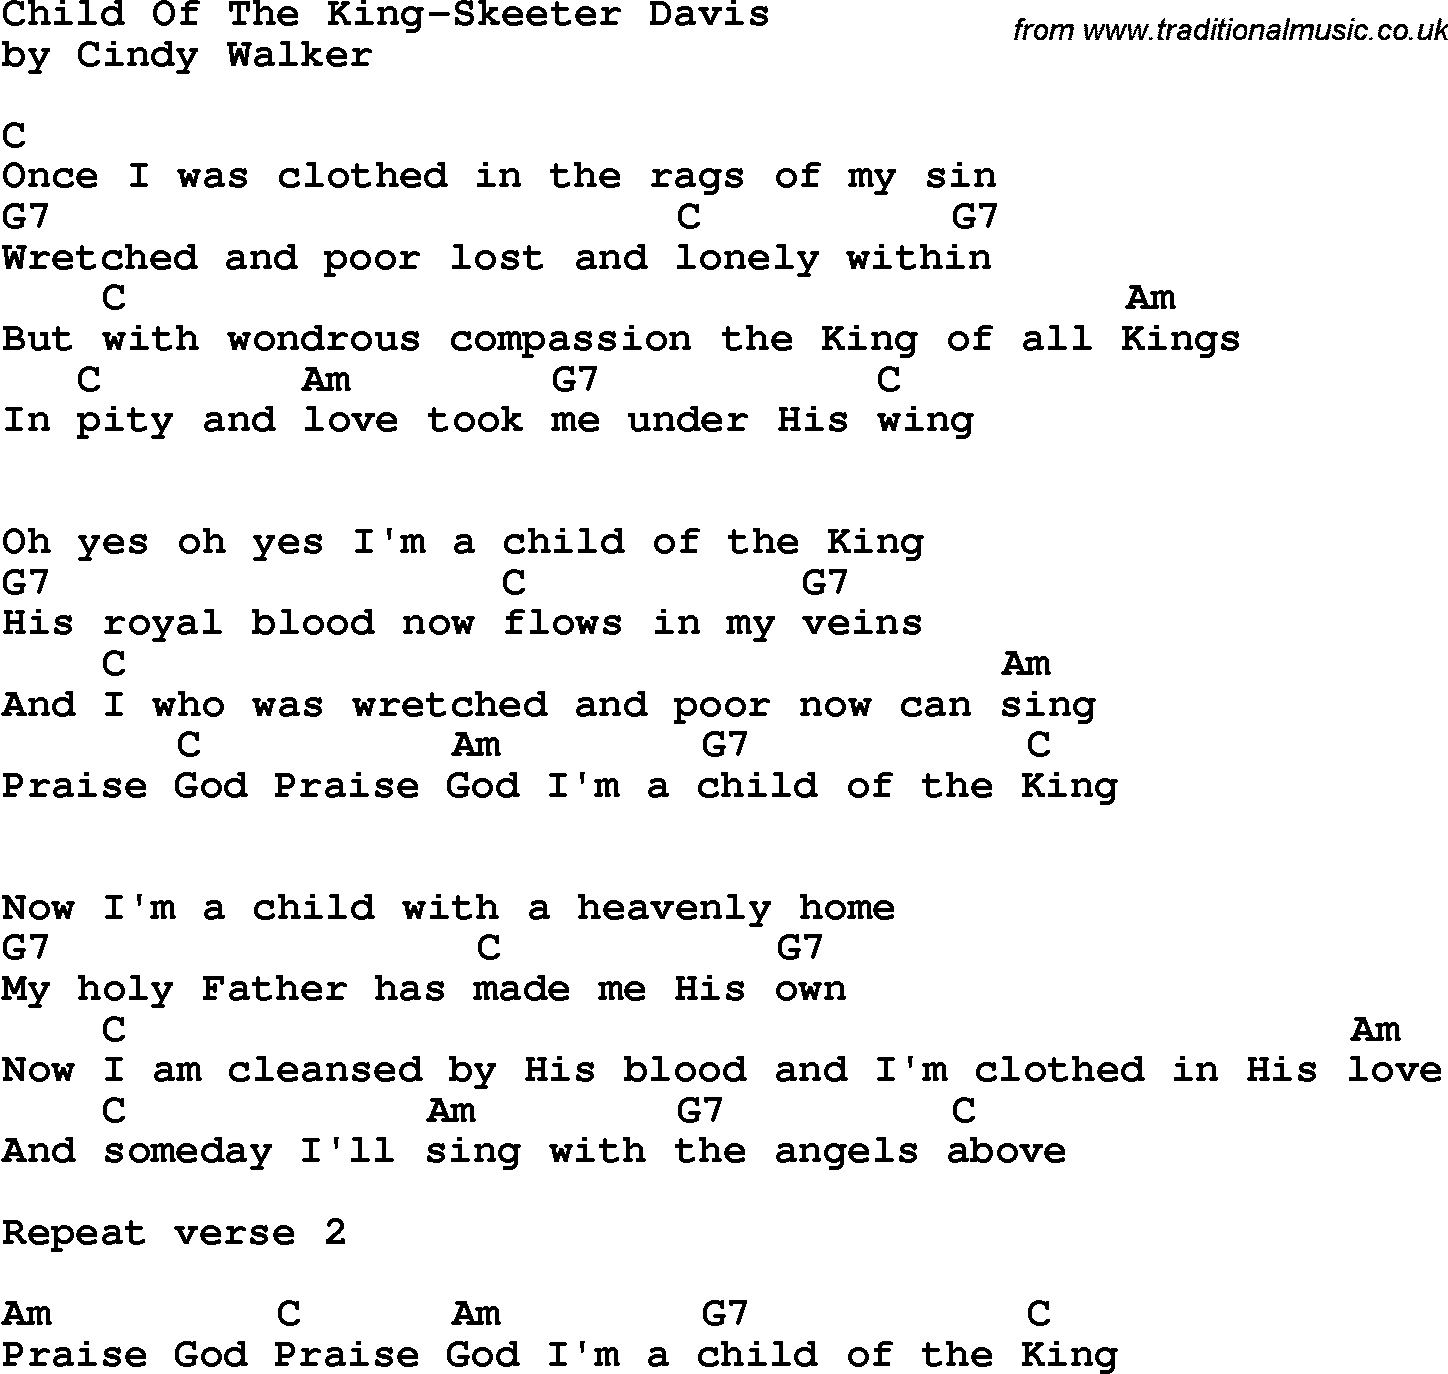 Country, Southern and Bluegrass Gospel Song Child Of The King-Skeeter Davis lyrics and chords